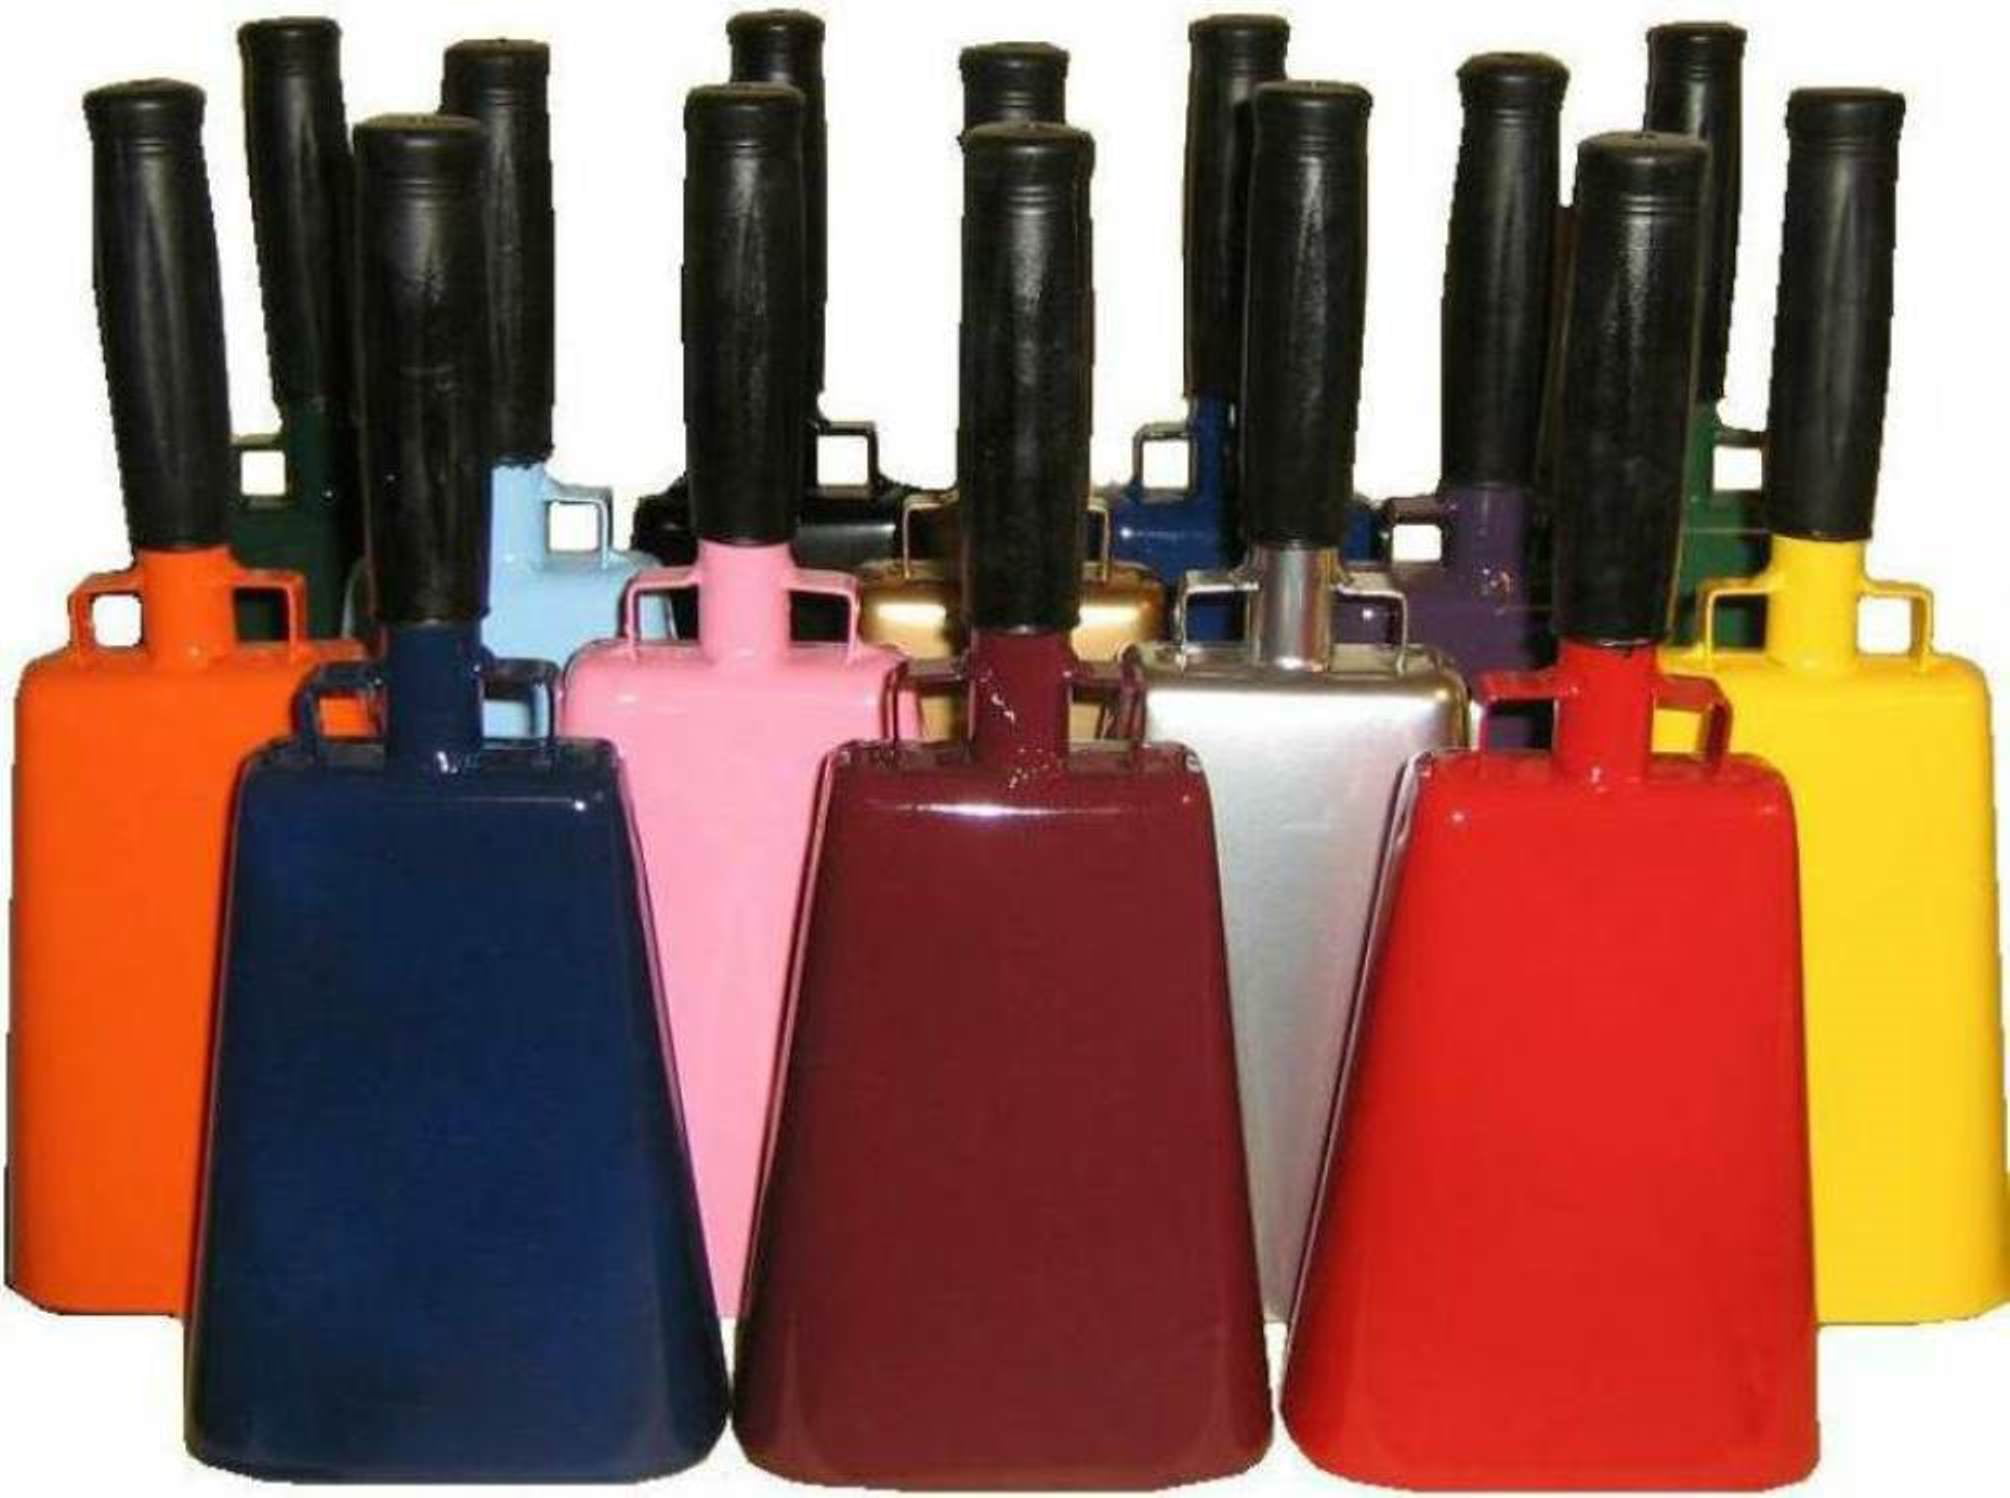 Cow Bell by Stewart Trading™ Various Sizes and Team Colors Cowbell with Stick Grip Handle Bell for Cheering at Sporting & Wedding Events